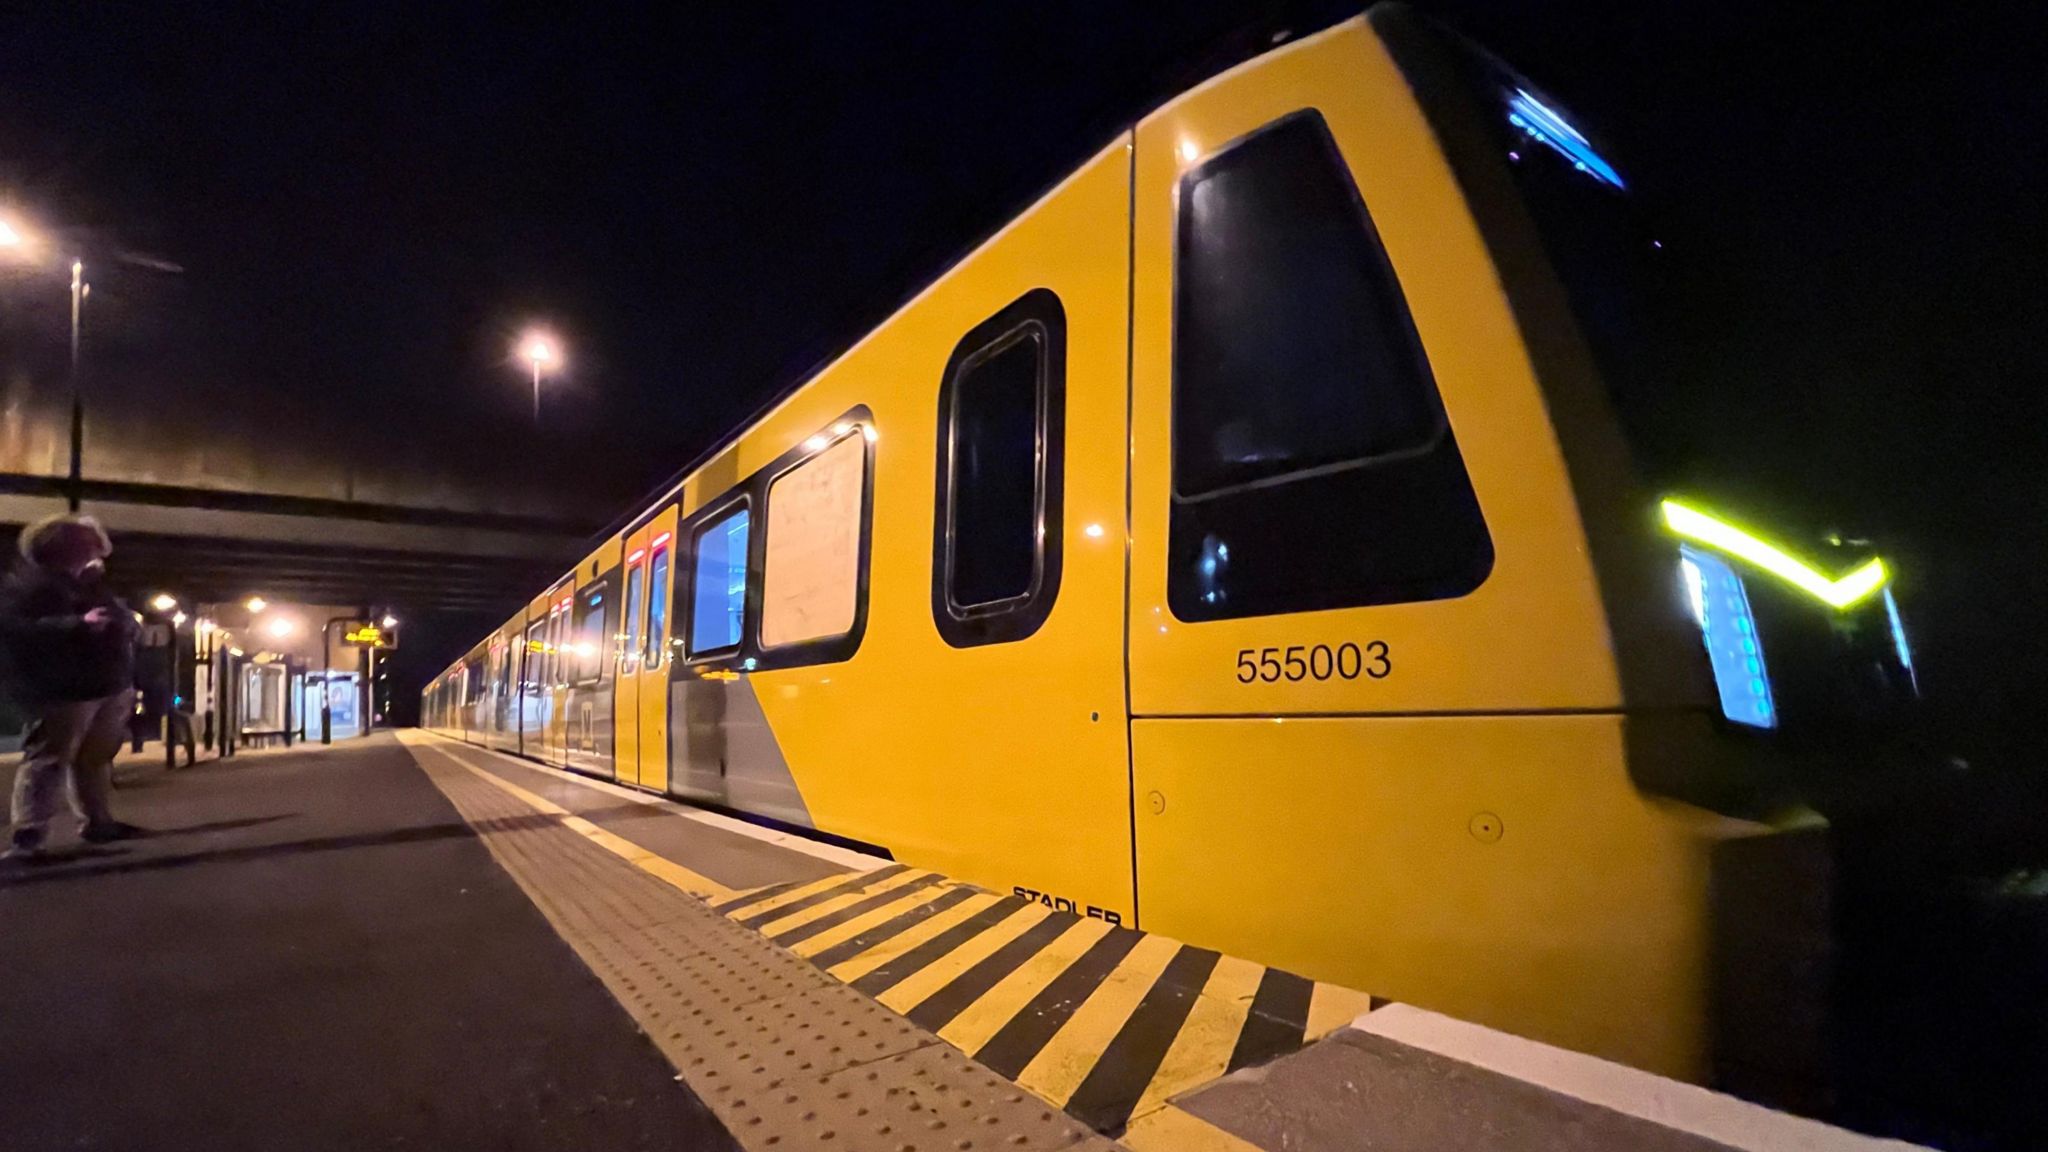 A new Tyne and Wear Metro train on its first test run in the North East, between South Gosforth and Monkseaton